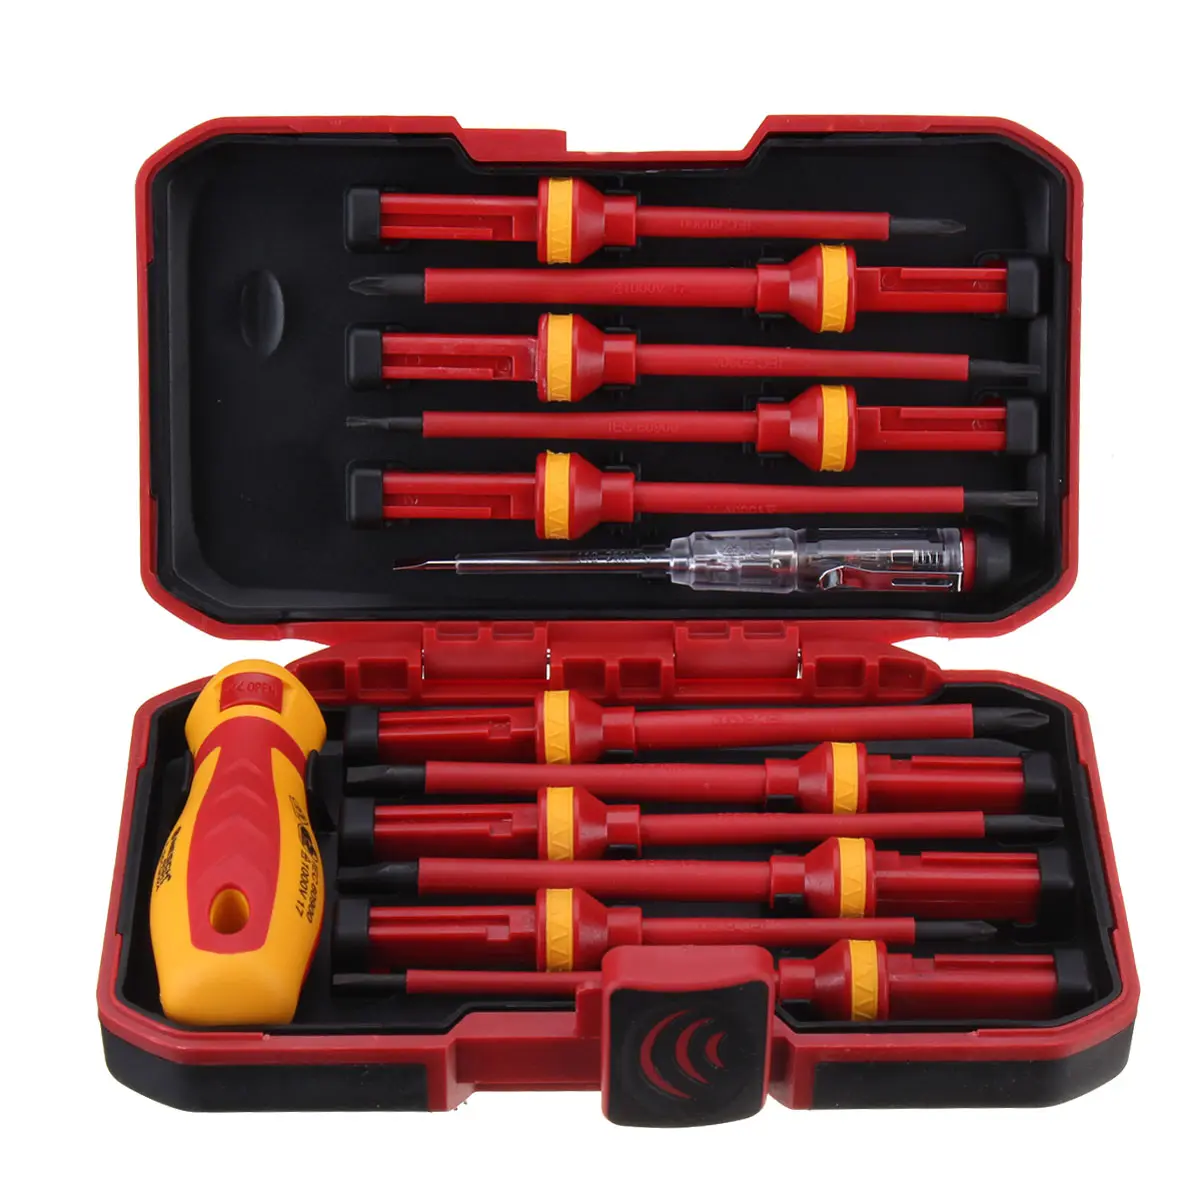 1000V 13 Pcs Electronic Insulated Screwdriver Set High Voltage 1000V Slotted Screwdriver Durable Hand Tools Accessory Set